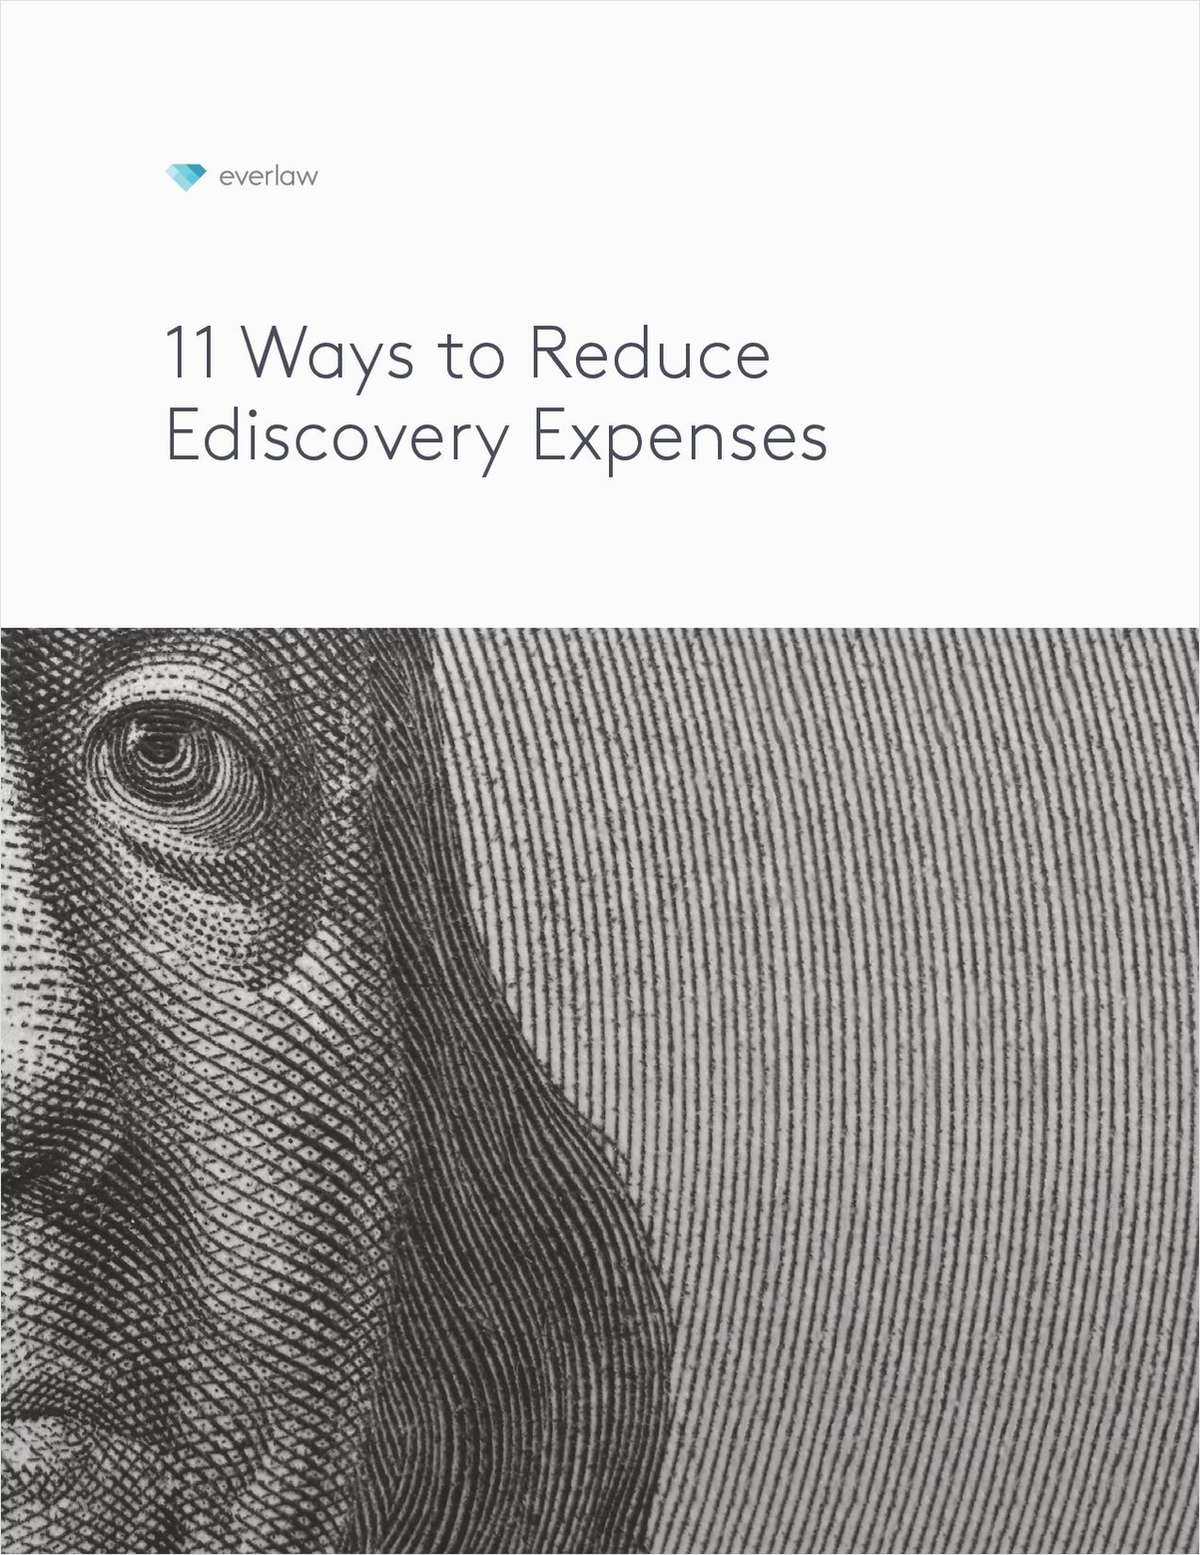 11 Ways to Reduce Ediscovery Expenses